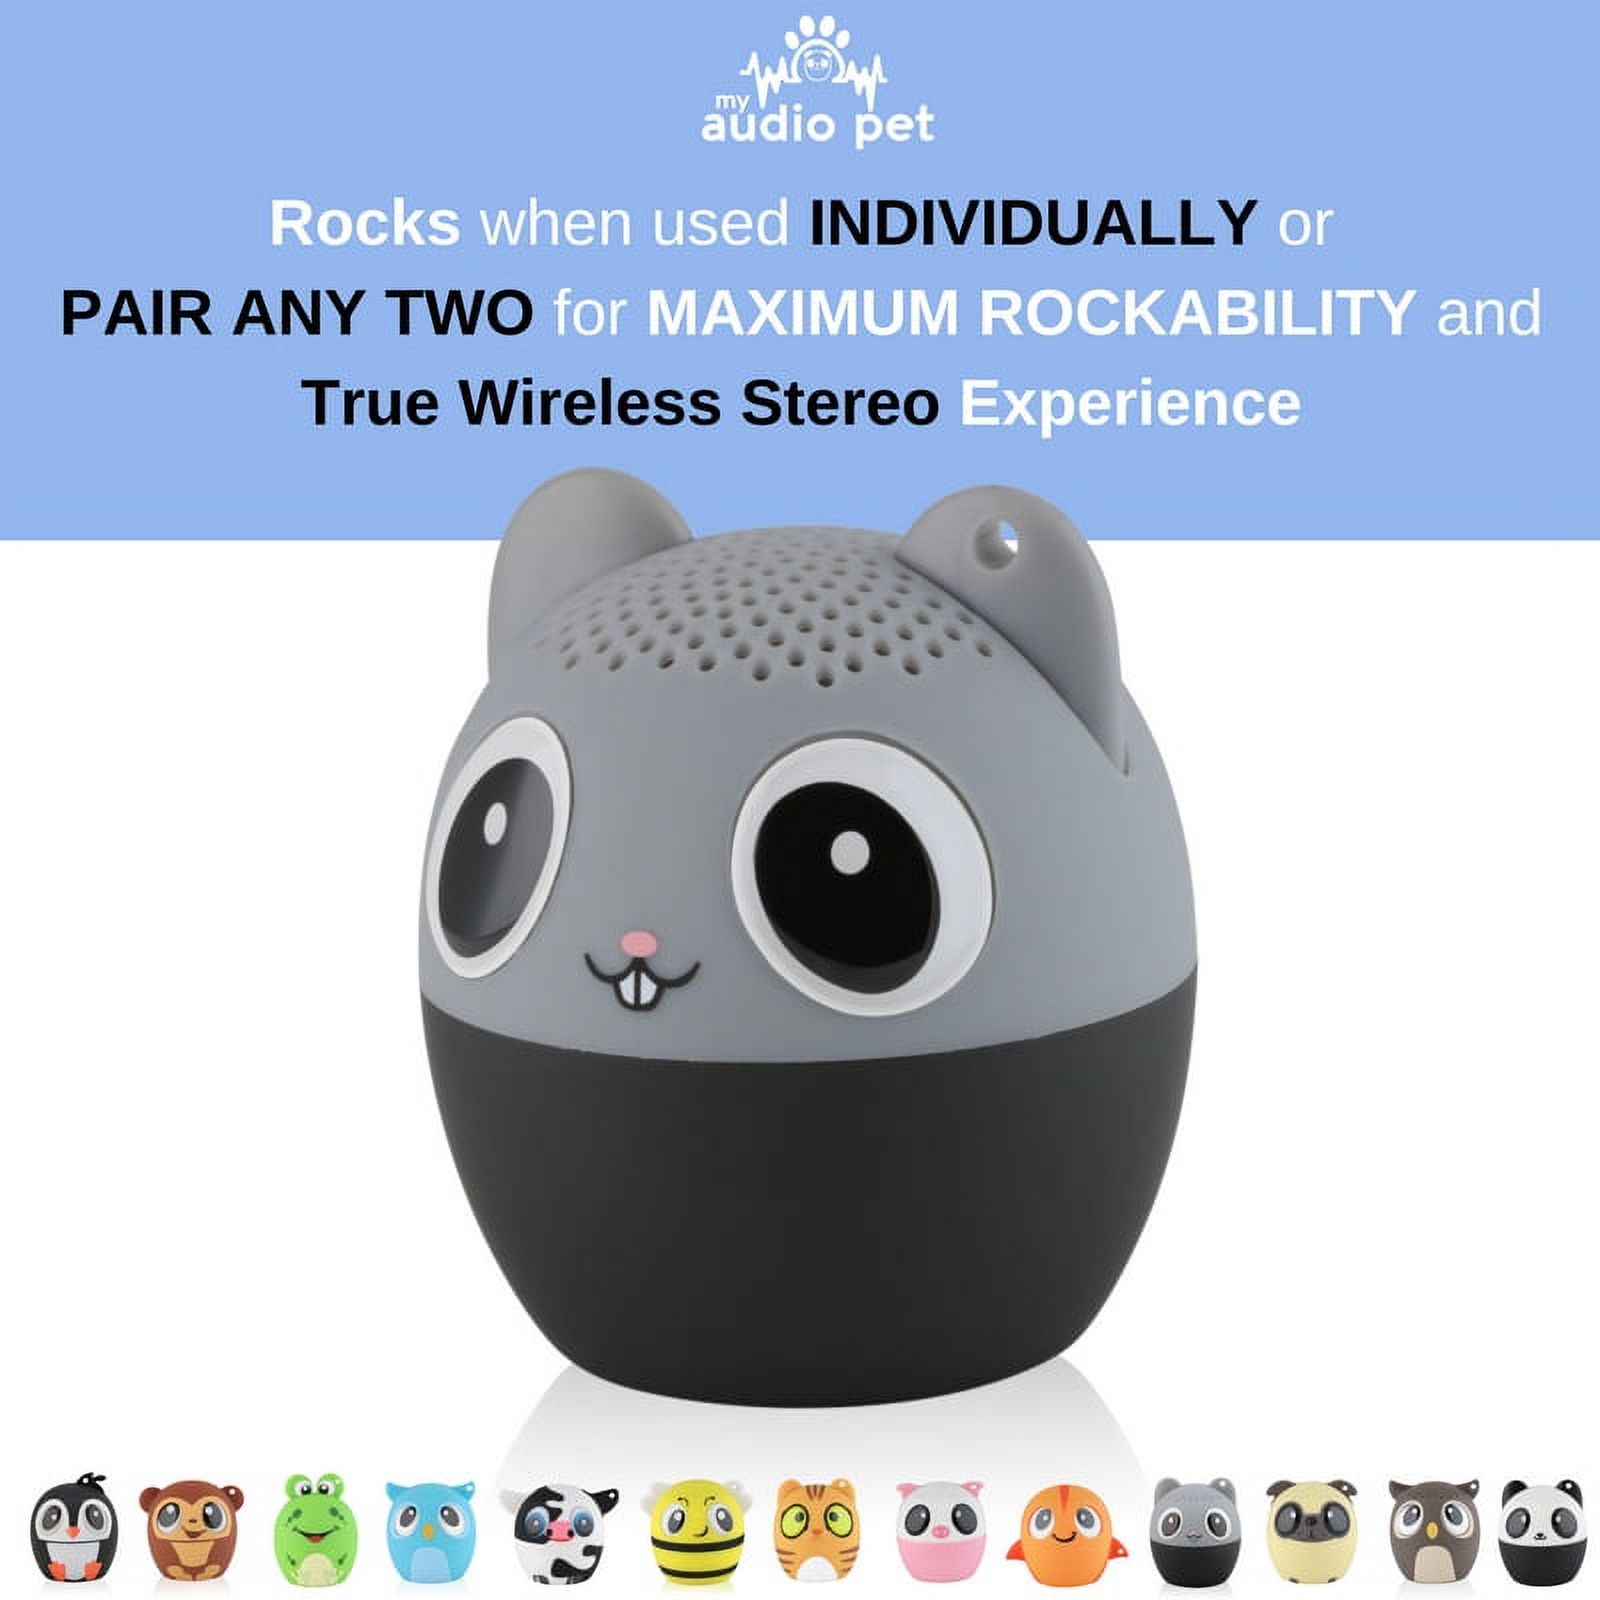 My Audio Pet (TWS) Mini Bluetooth Animal Wireless Speaker with TRUE WIRELESS STEREO TECHNOLOGY _ Pair with another TWS Pet for Powerful Rich Room-filling Sound _ (Mega Mouse) - image 5 of 6